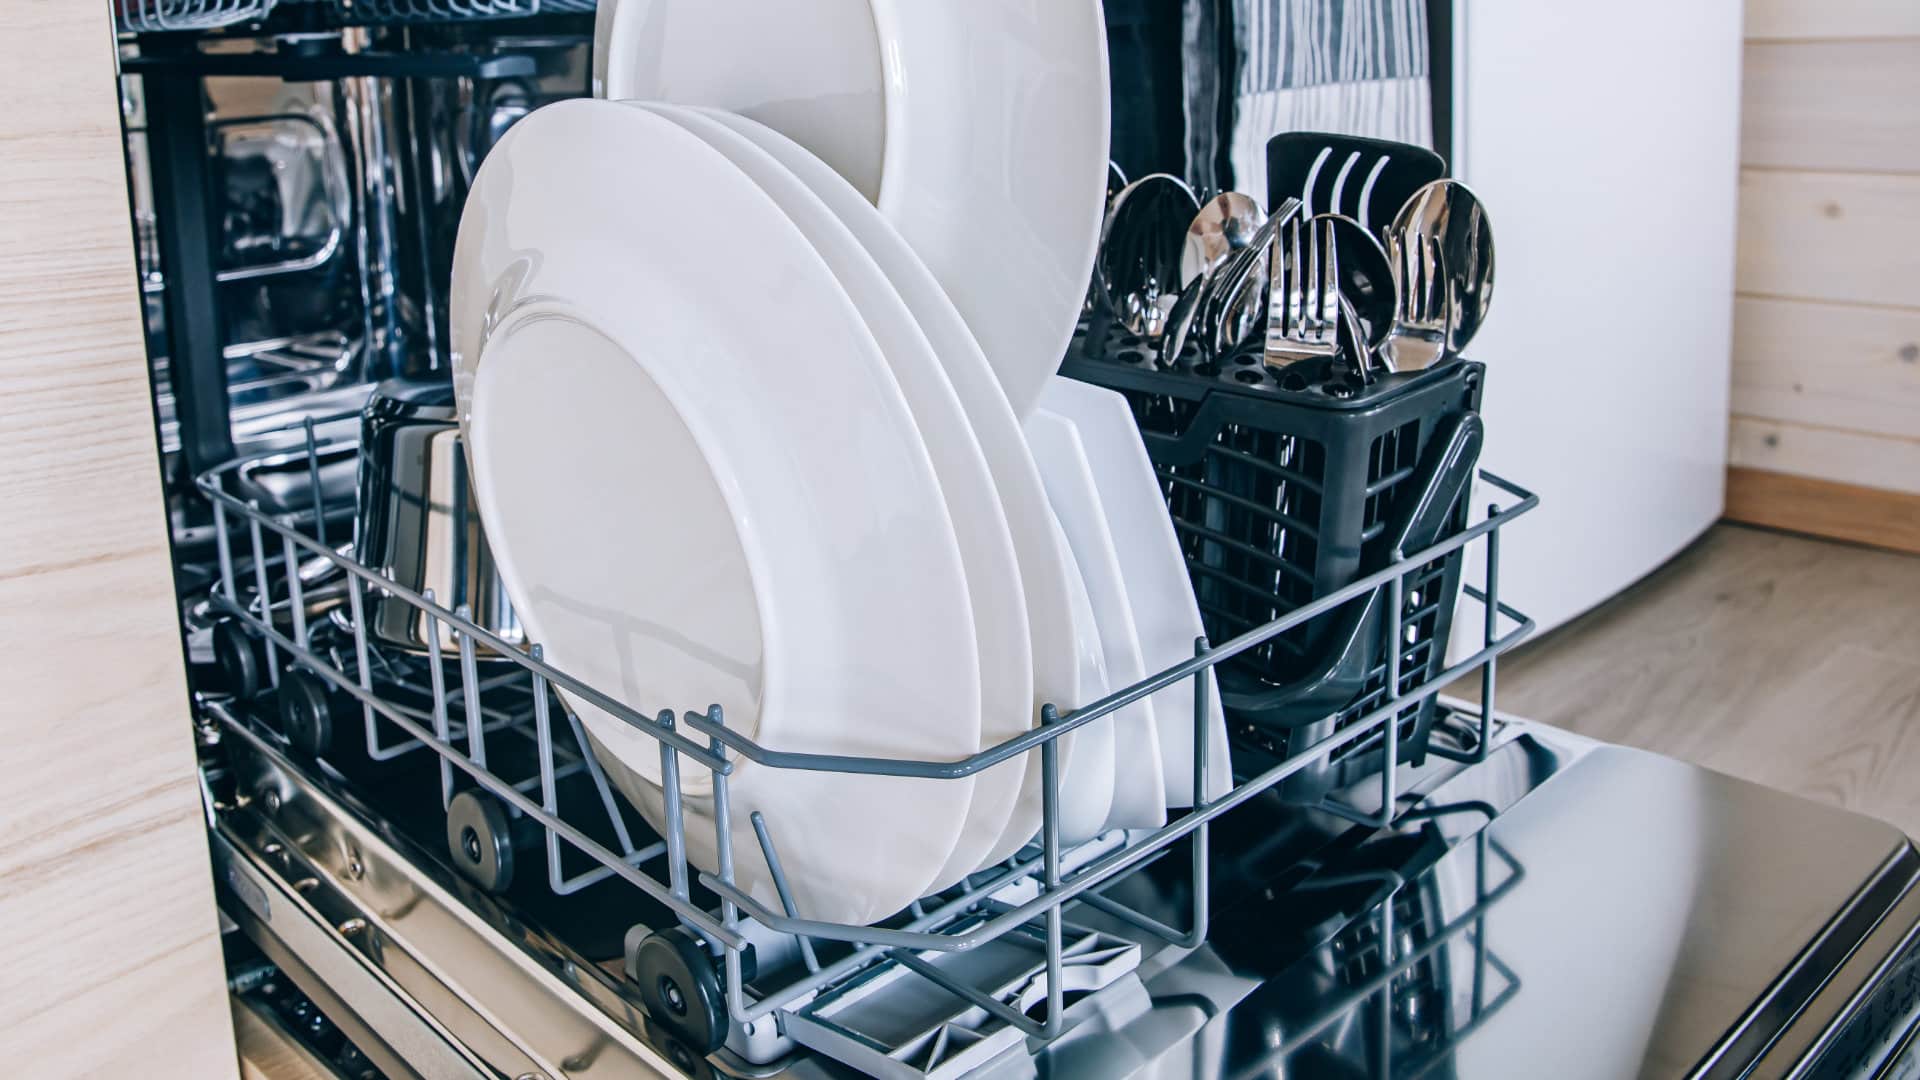 Featured image for “Whirlpool Dishwasher Leaking? Here’s Why”